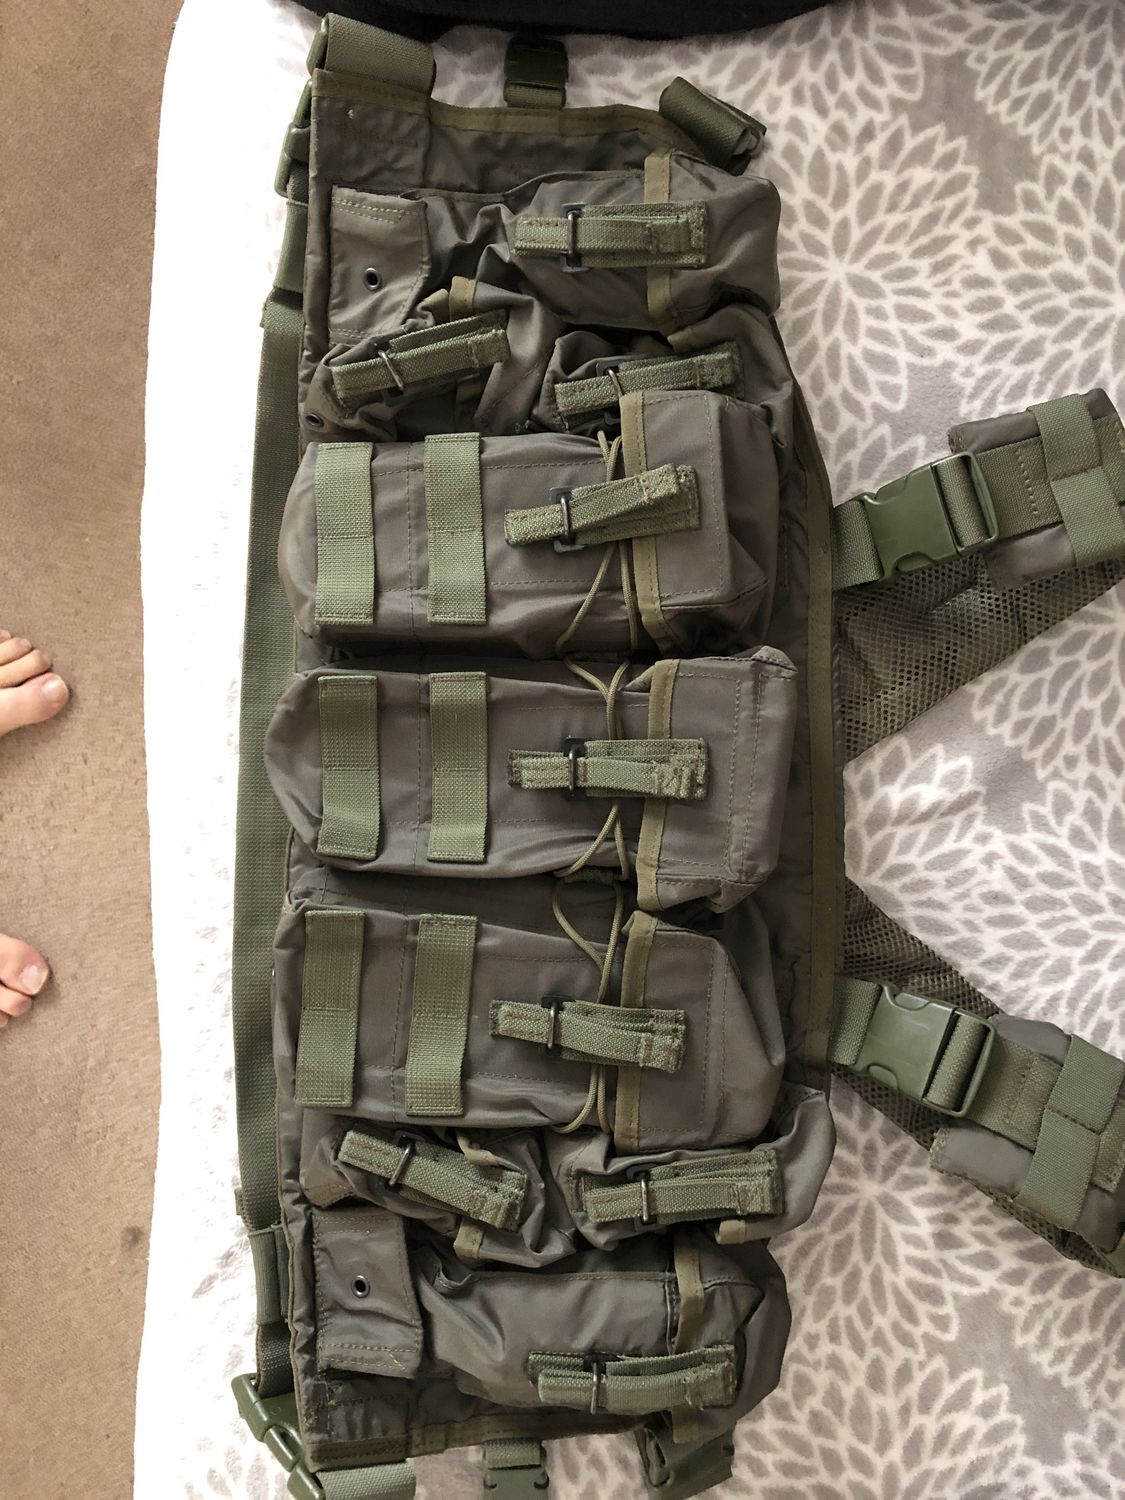 Russian Chest Rig - Gear - Airsoft Forums UK